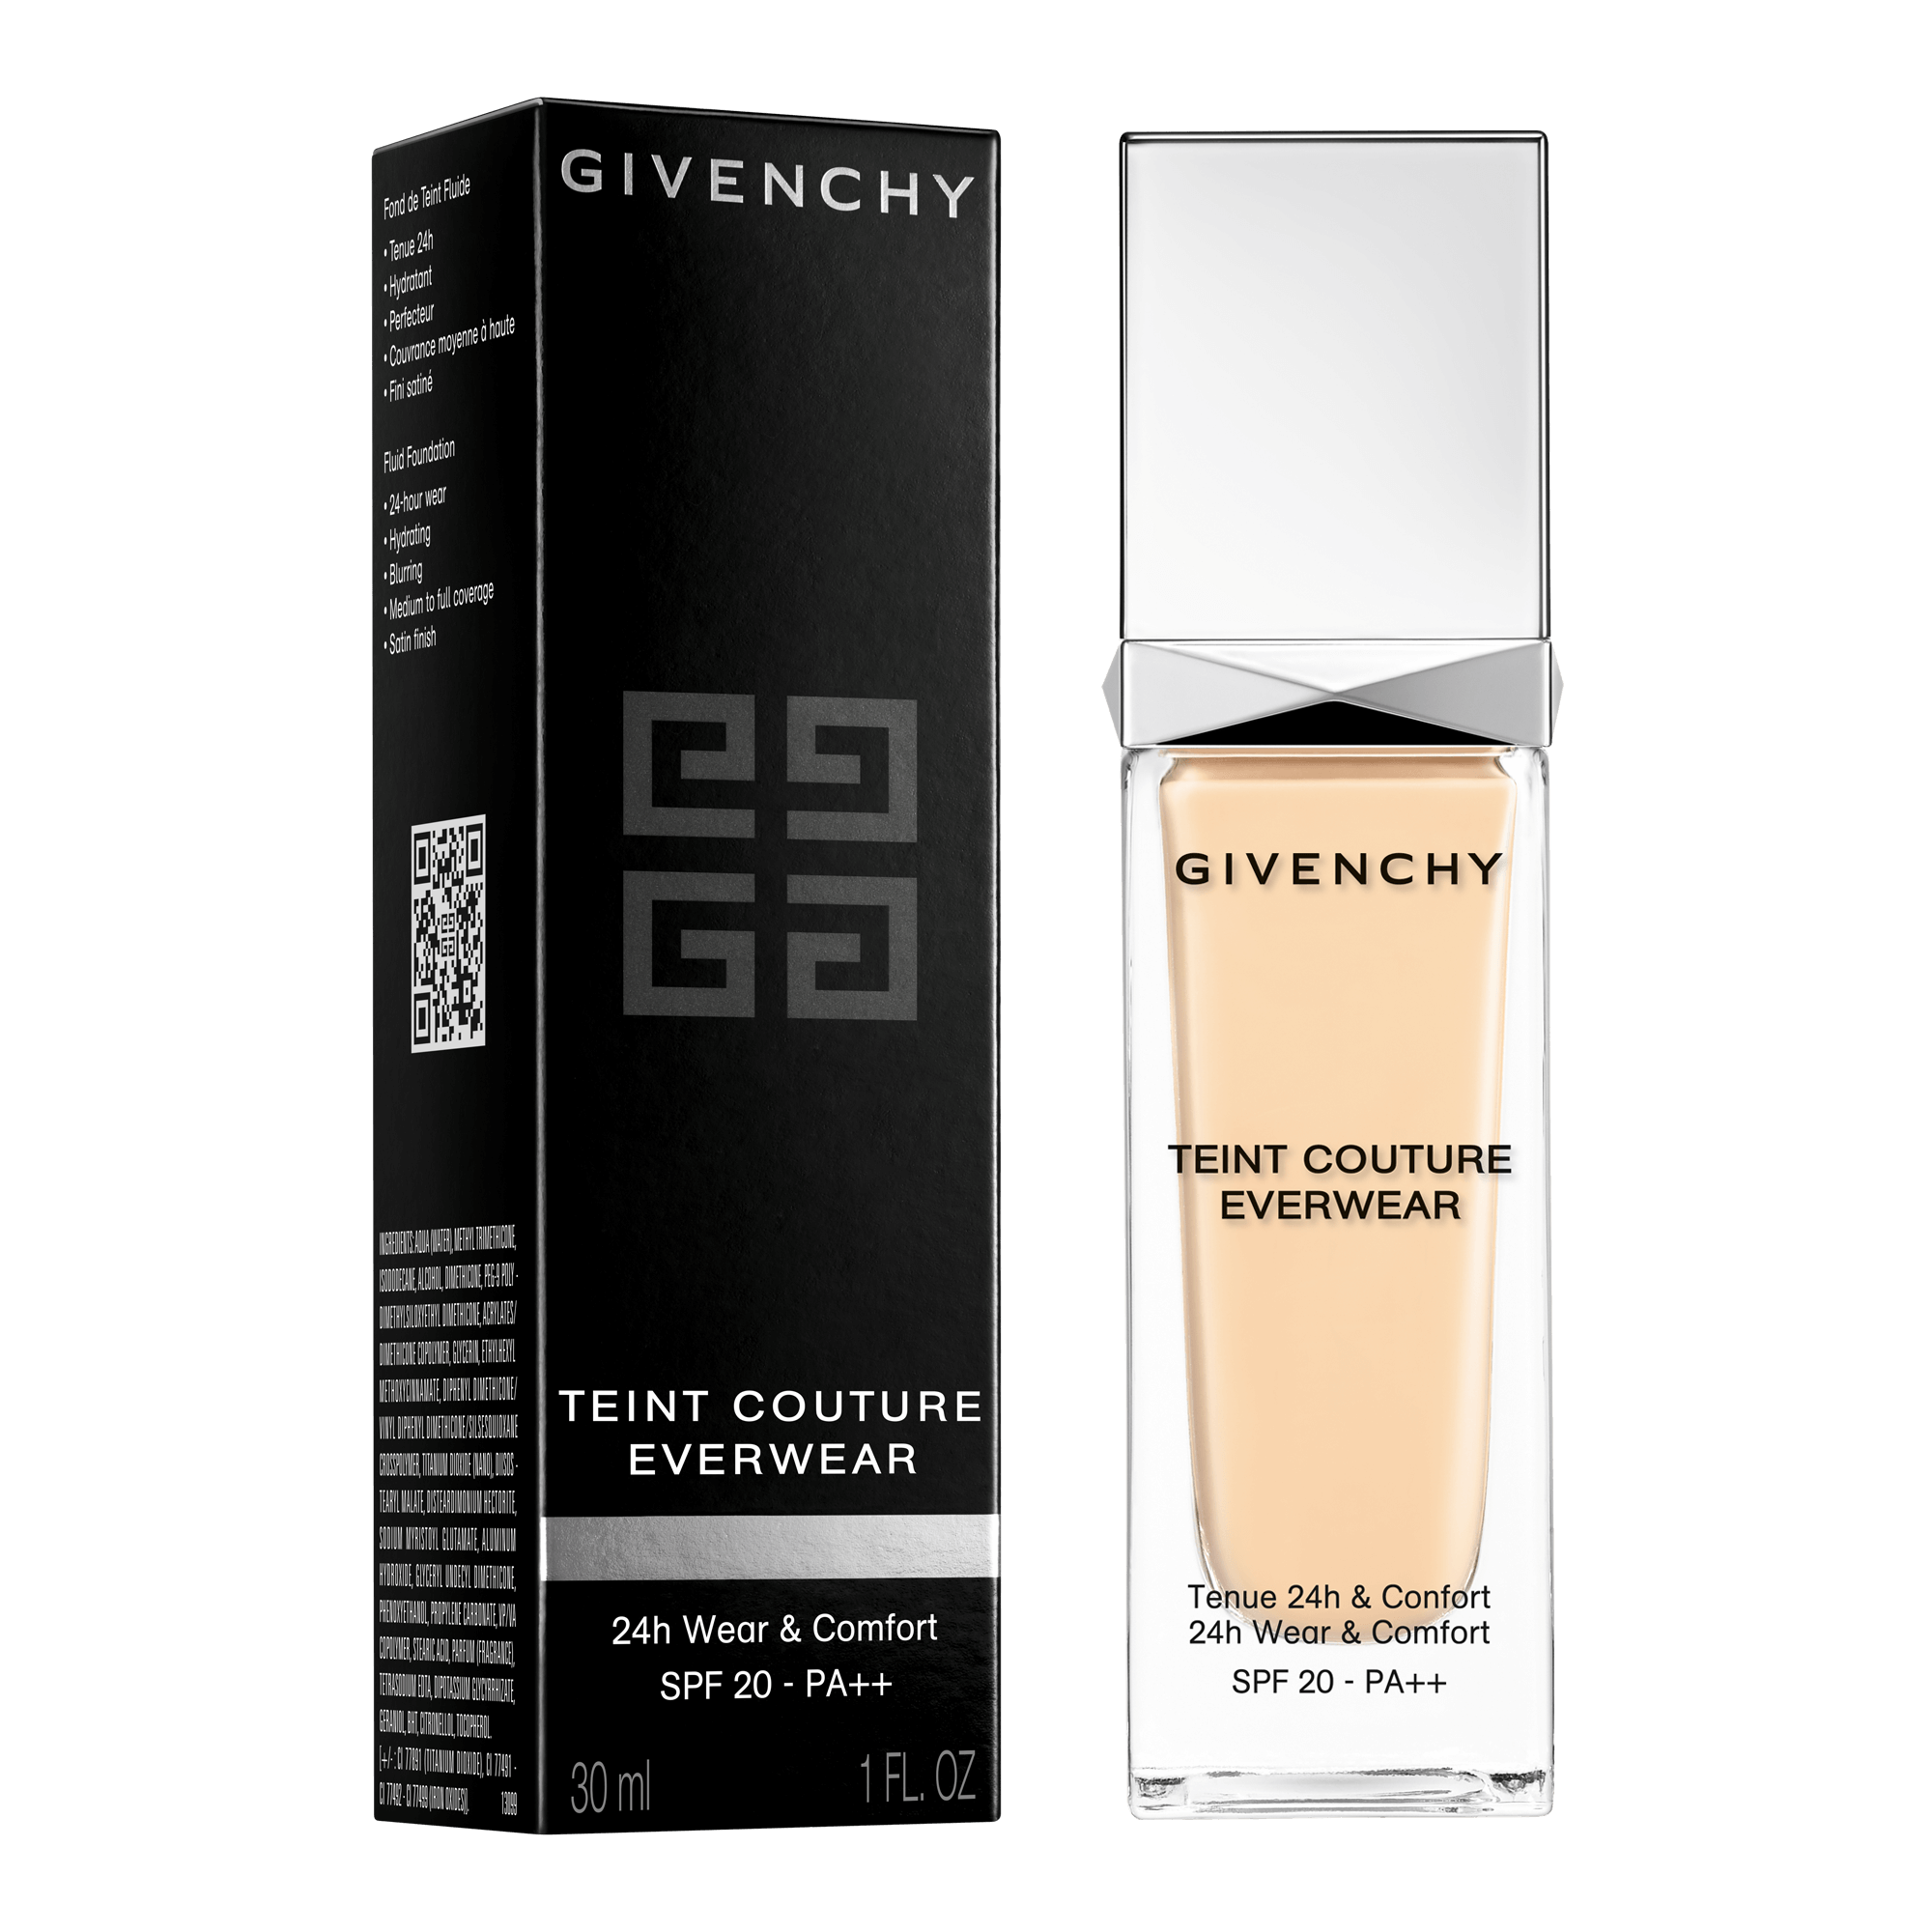 TEINT COUTURE EVERWEAR • 24H WEAR lifeproof foundation ∷ GIVENCHY